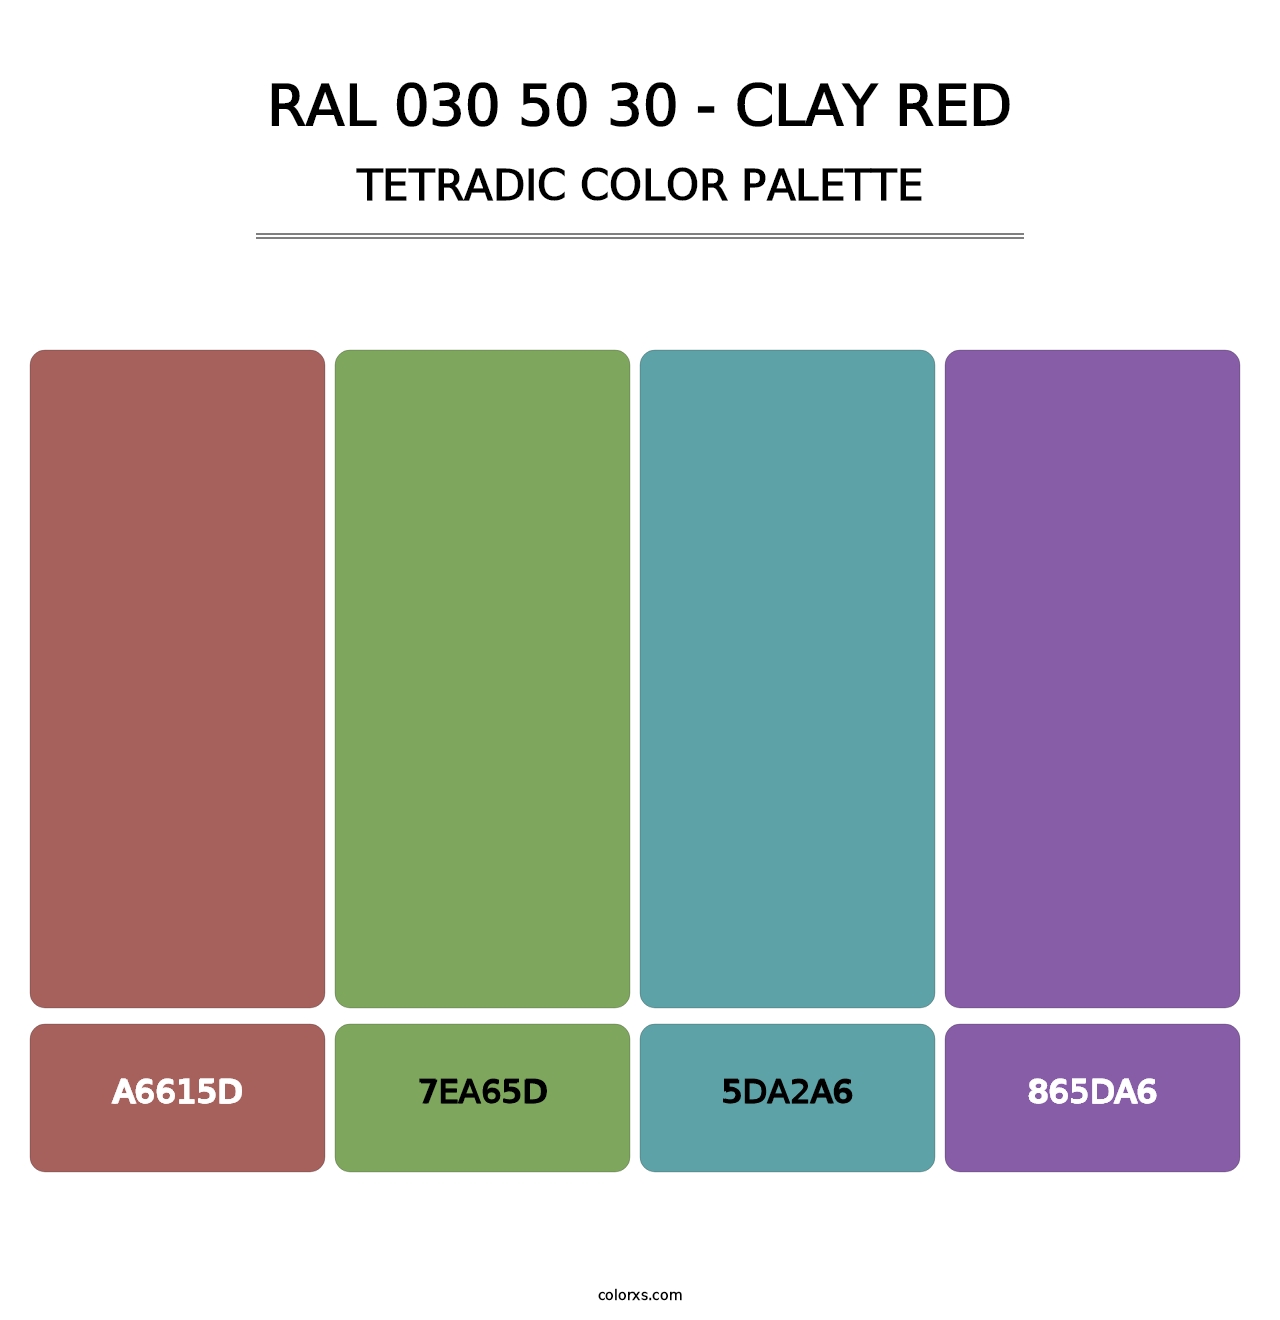 RAL 030 50 30 - Clay Red - Tetradic Color Palette